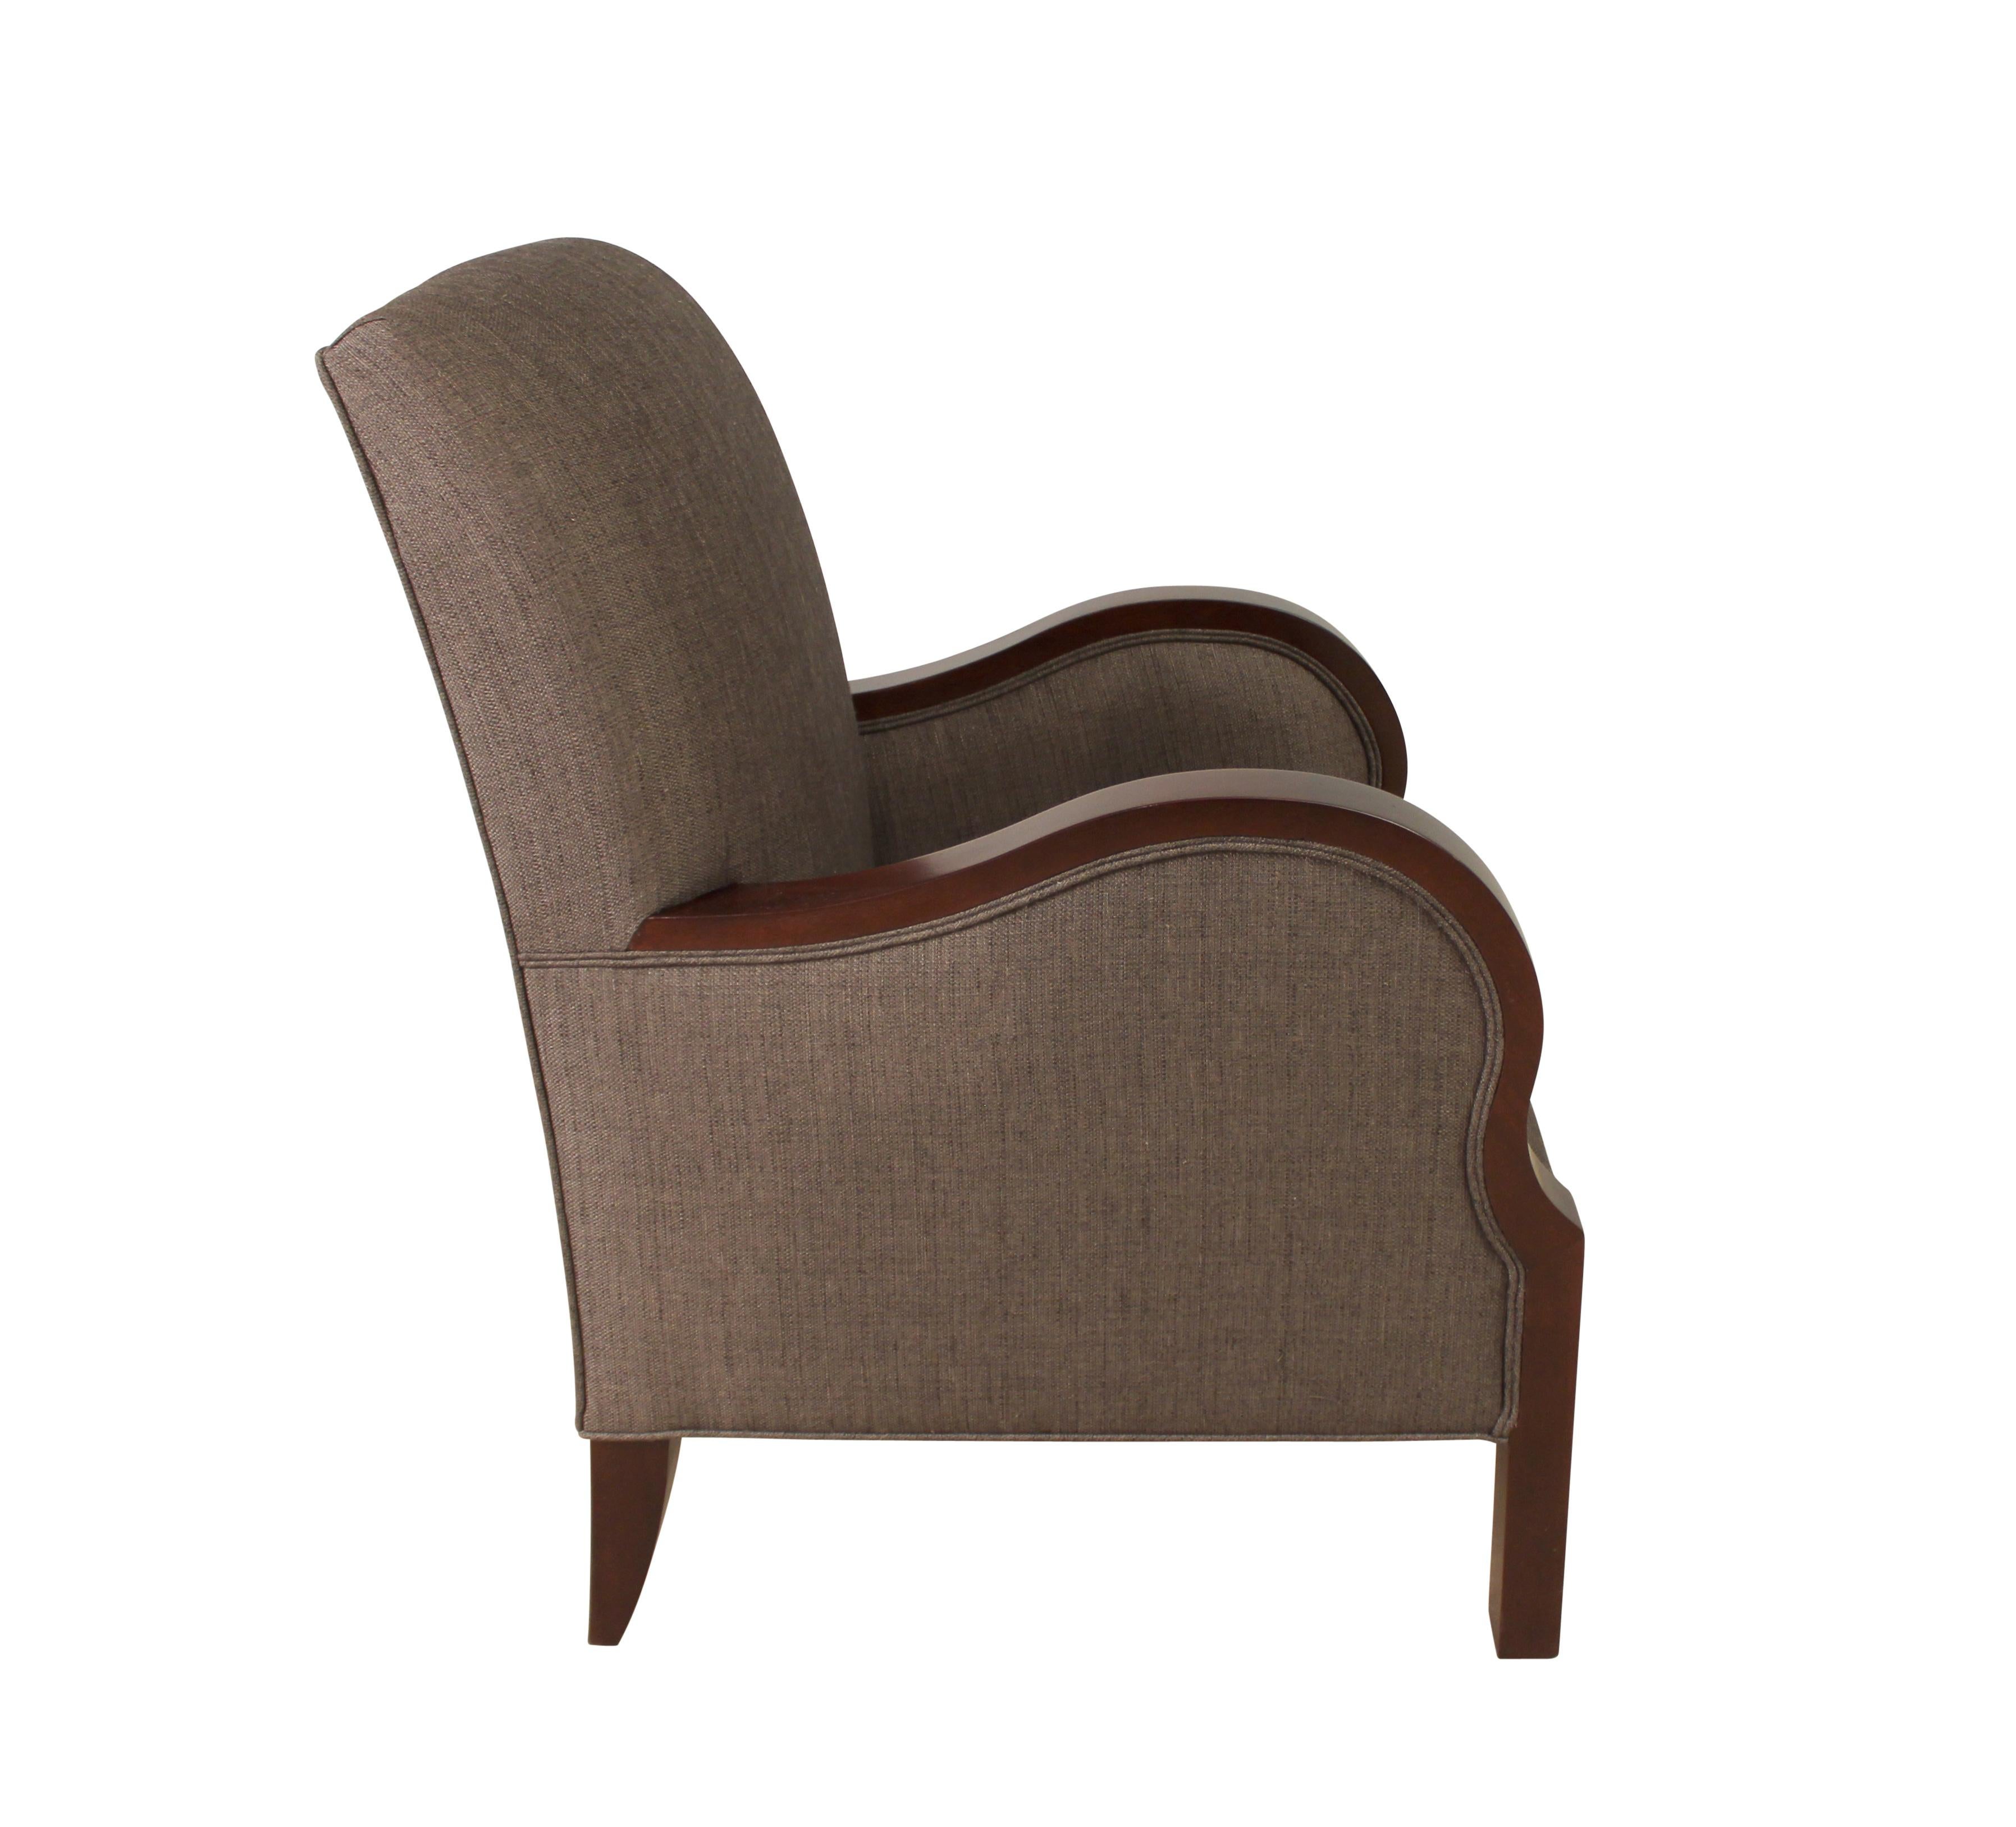 Modernist club char in mahogany veneer with satin lacquer finish blends Art Deco and Neoclassical influences with contemporary aesthetic of private and social spaces.  Modernist series connects past to the present by mixing traditional techniques